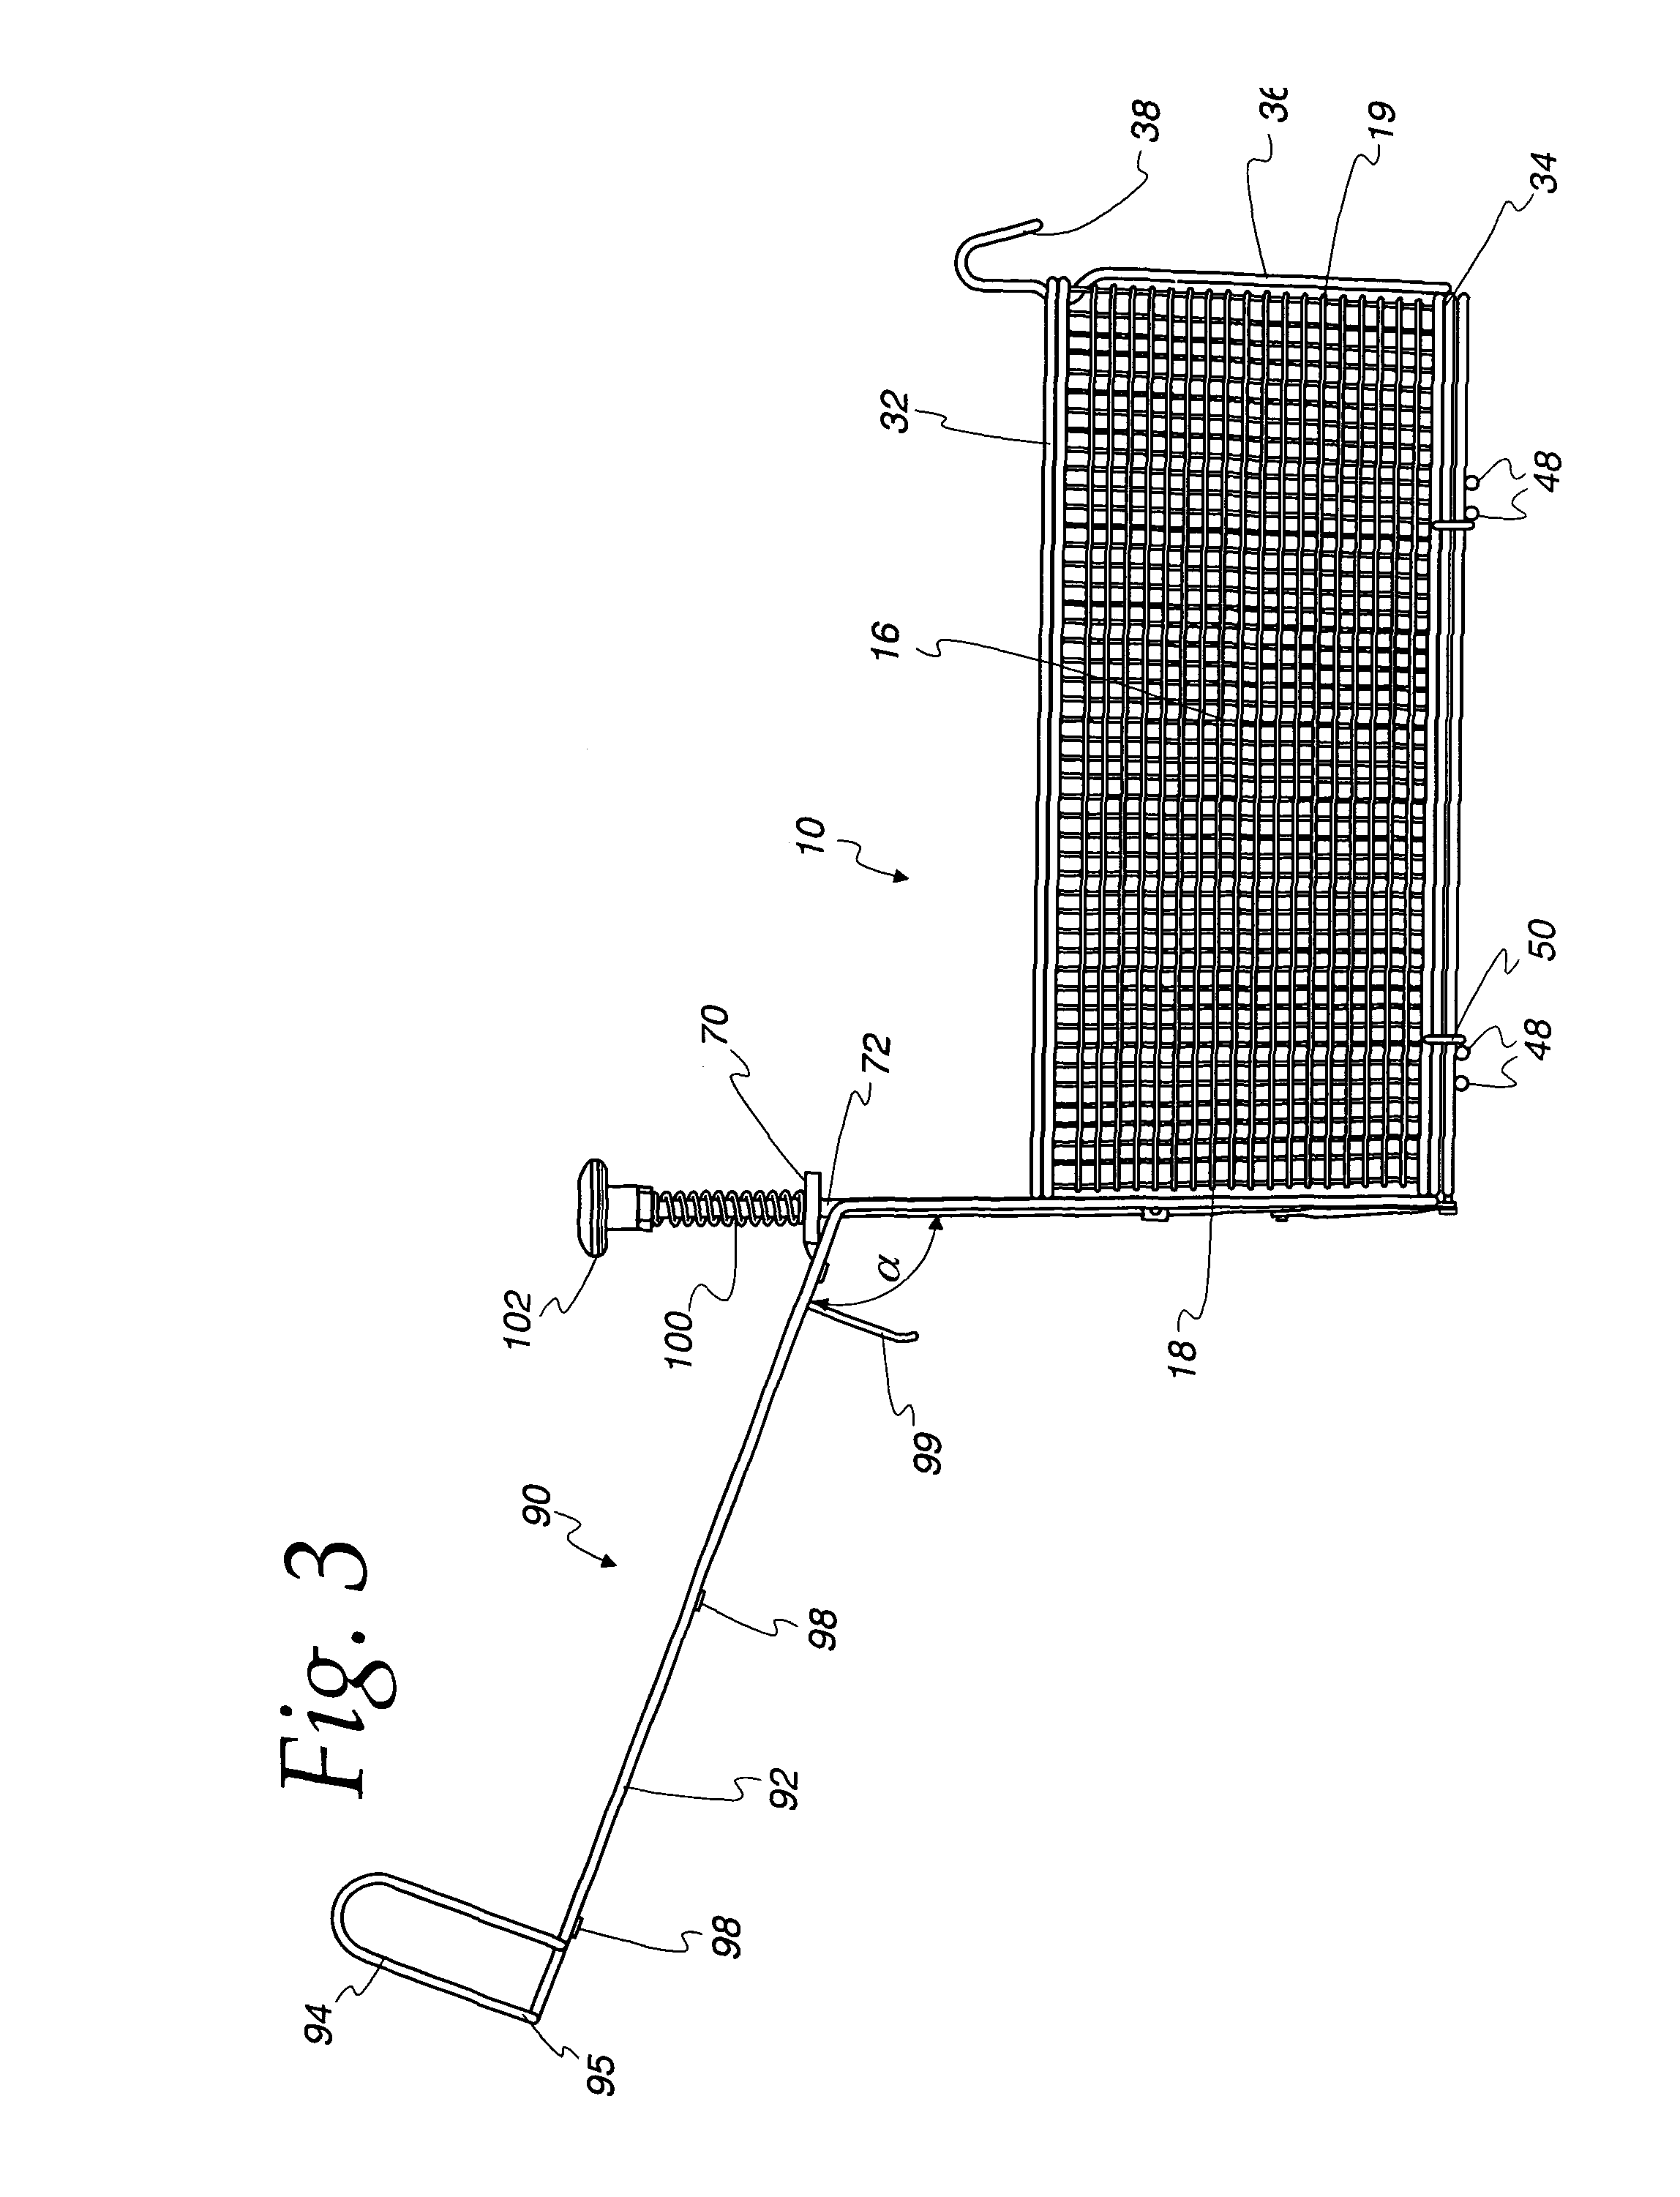 Fry basket for processing of bulk food items and method